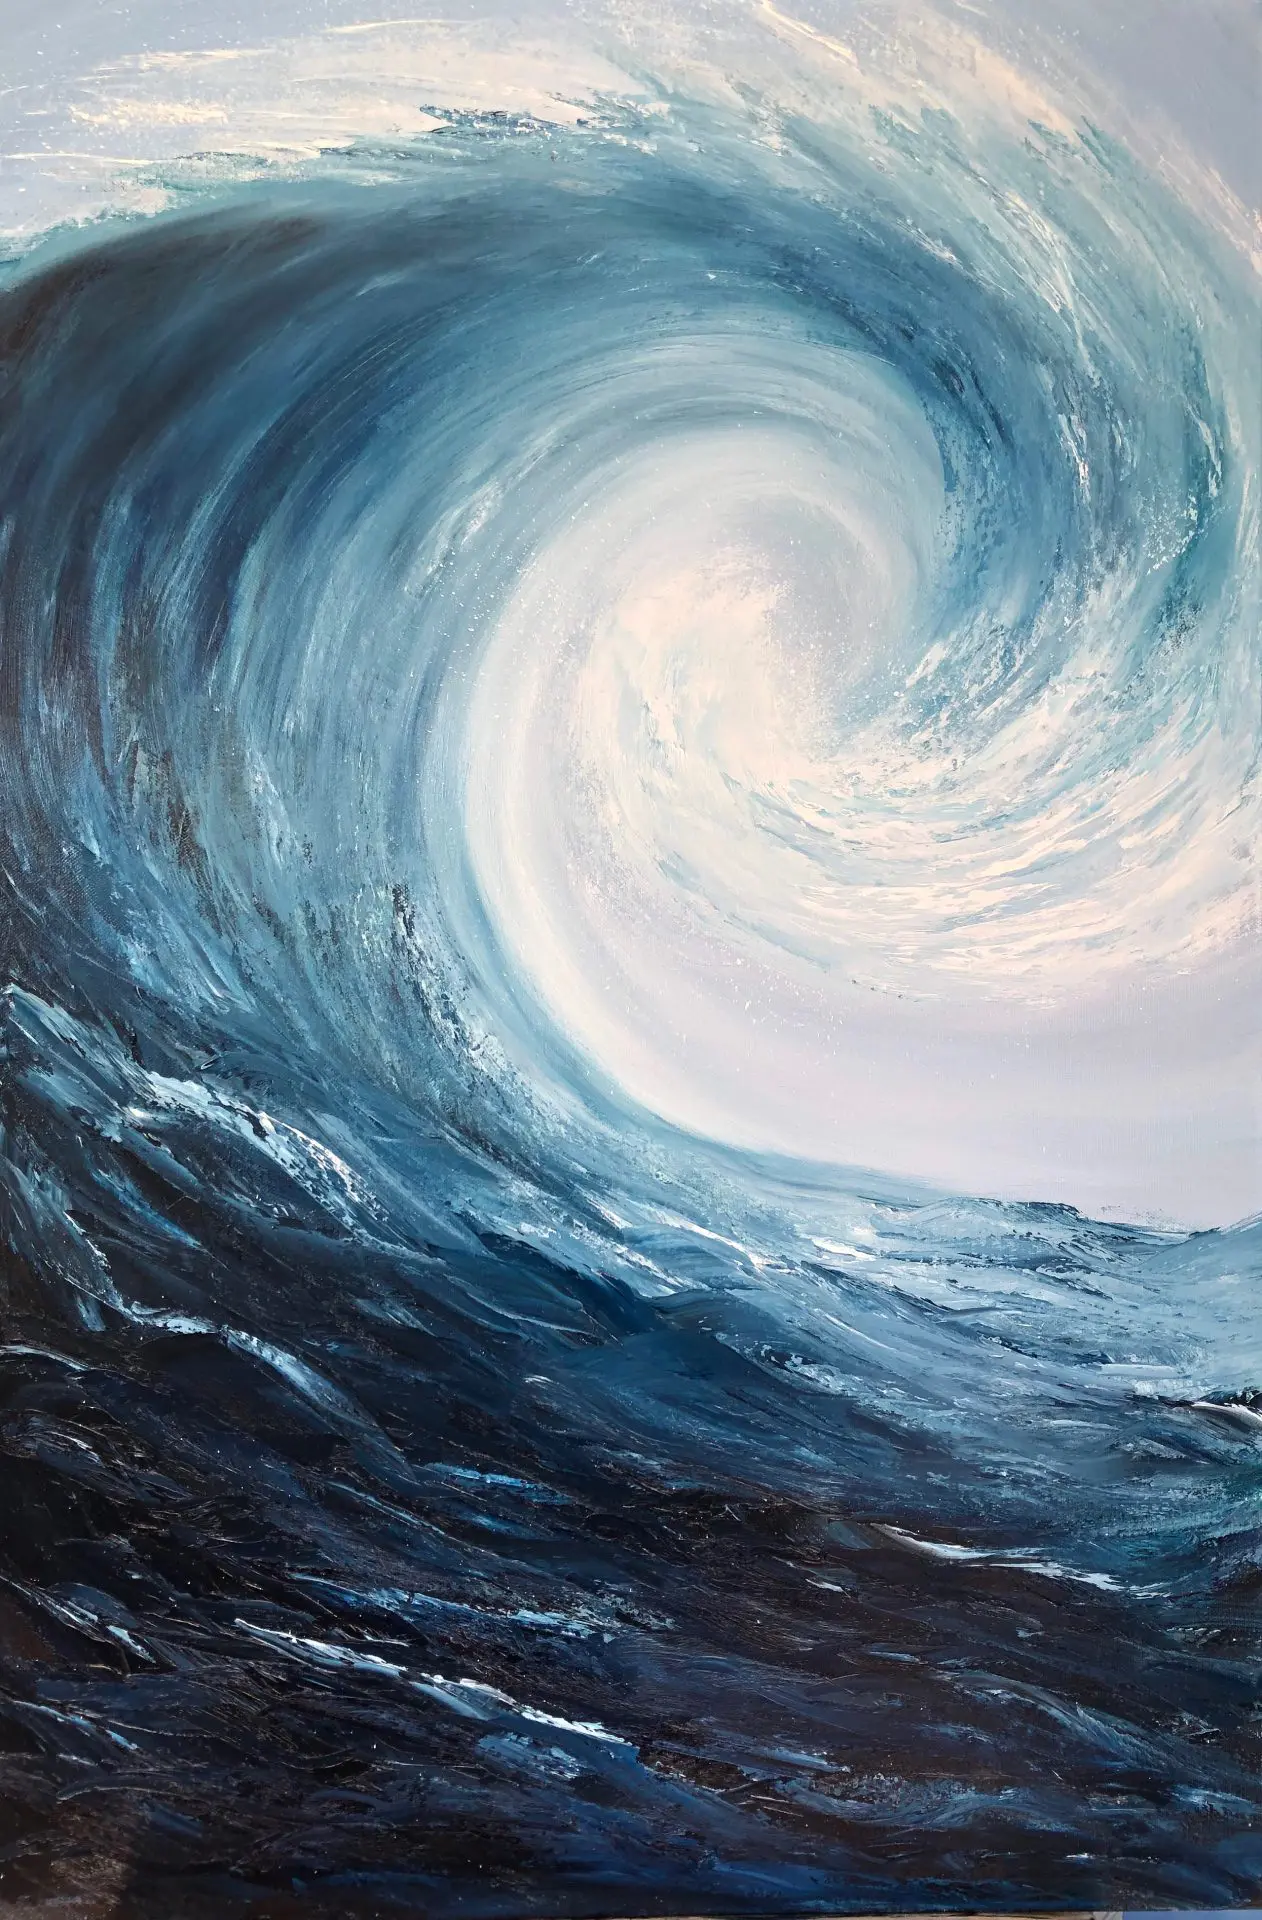 Surf original oil painting on canvas 60 x 90 cm for sale in my online gallery.